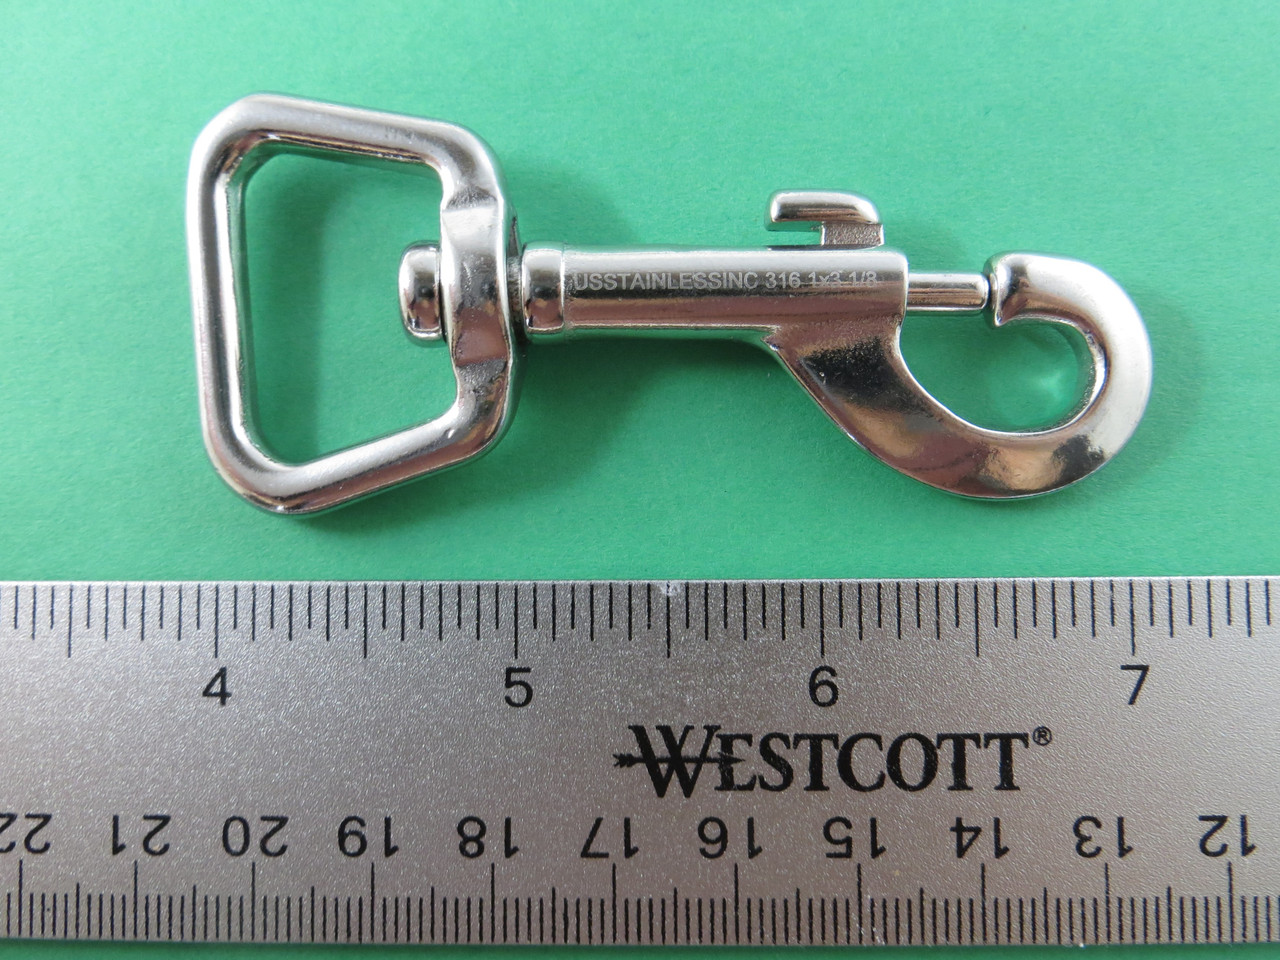 Stainless Steel 316 1 x 3 1/8 Bolt Snap Square Swivel End Marine Grade  Polished